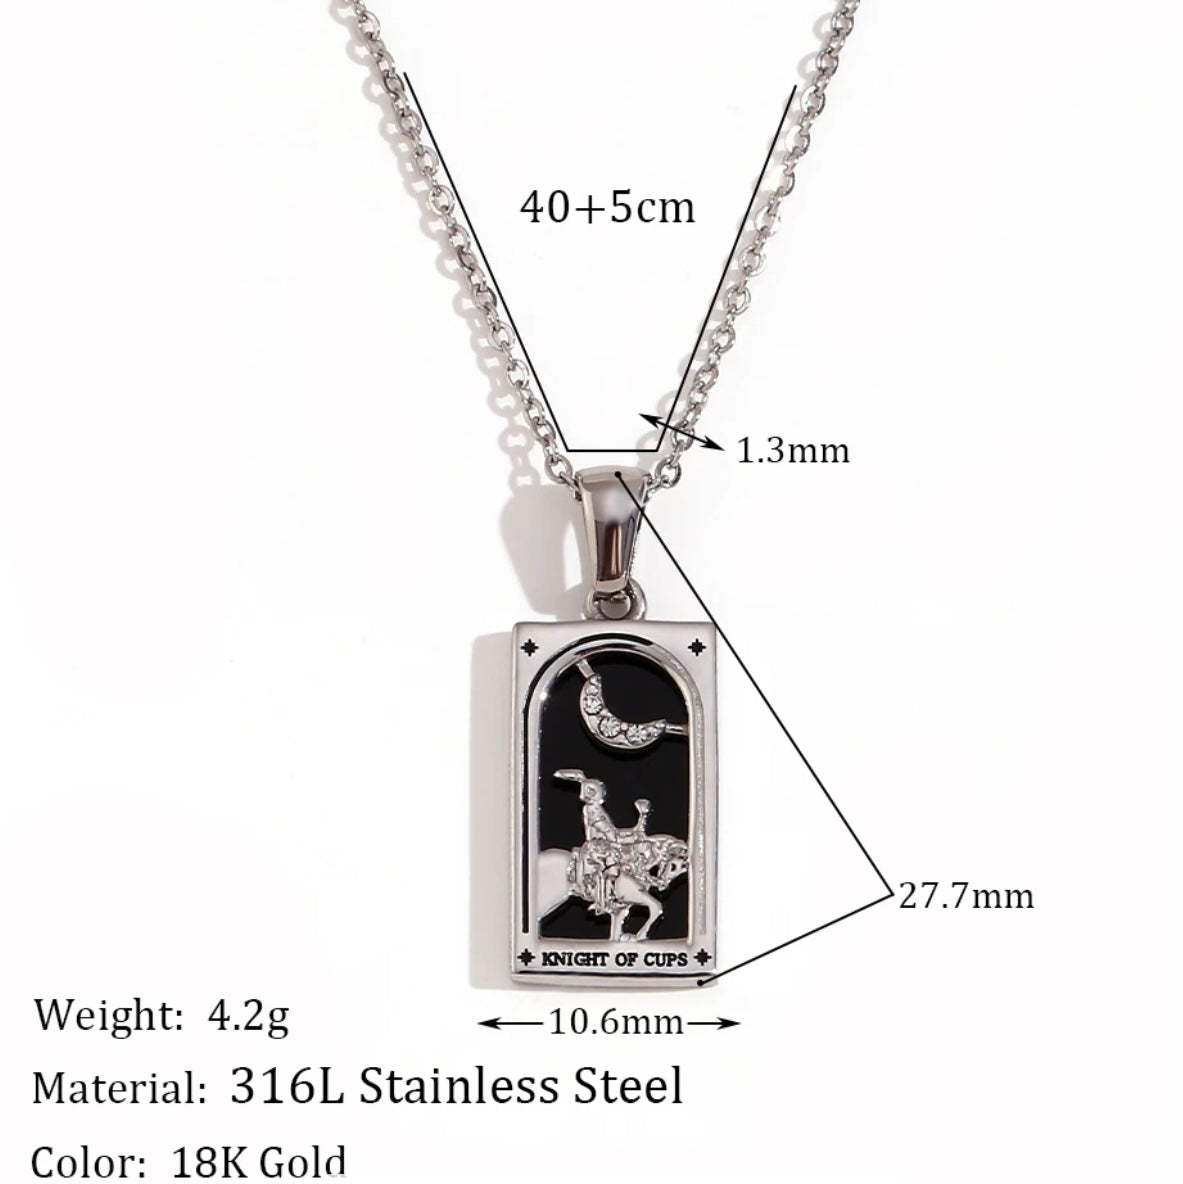 Rhodium Plated Tarot Card Necklace - The Knight of Cups